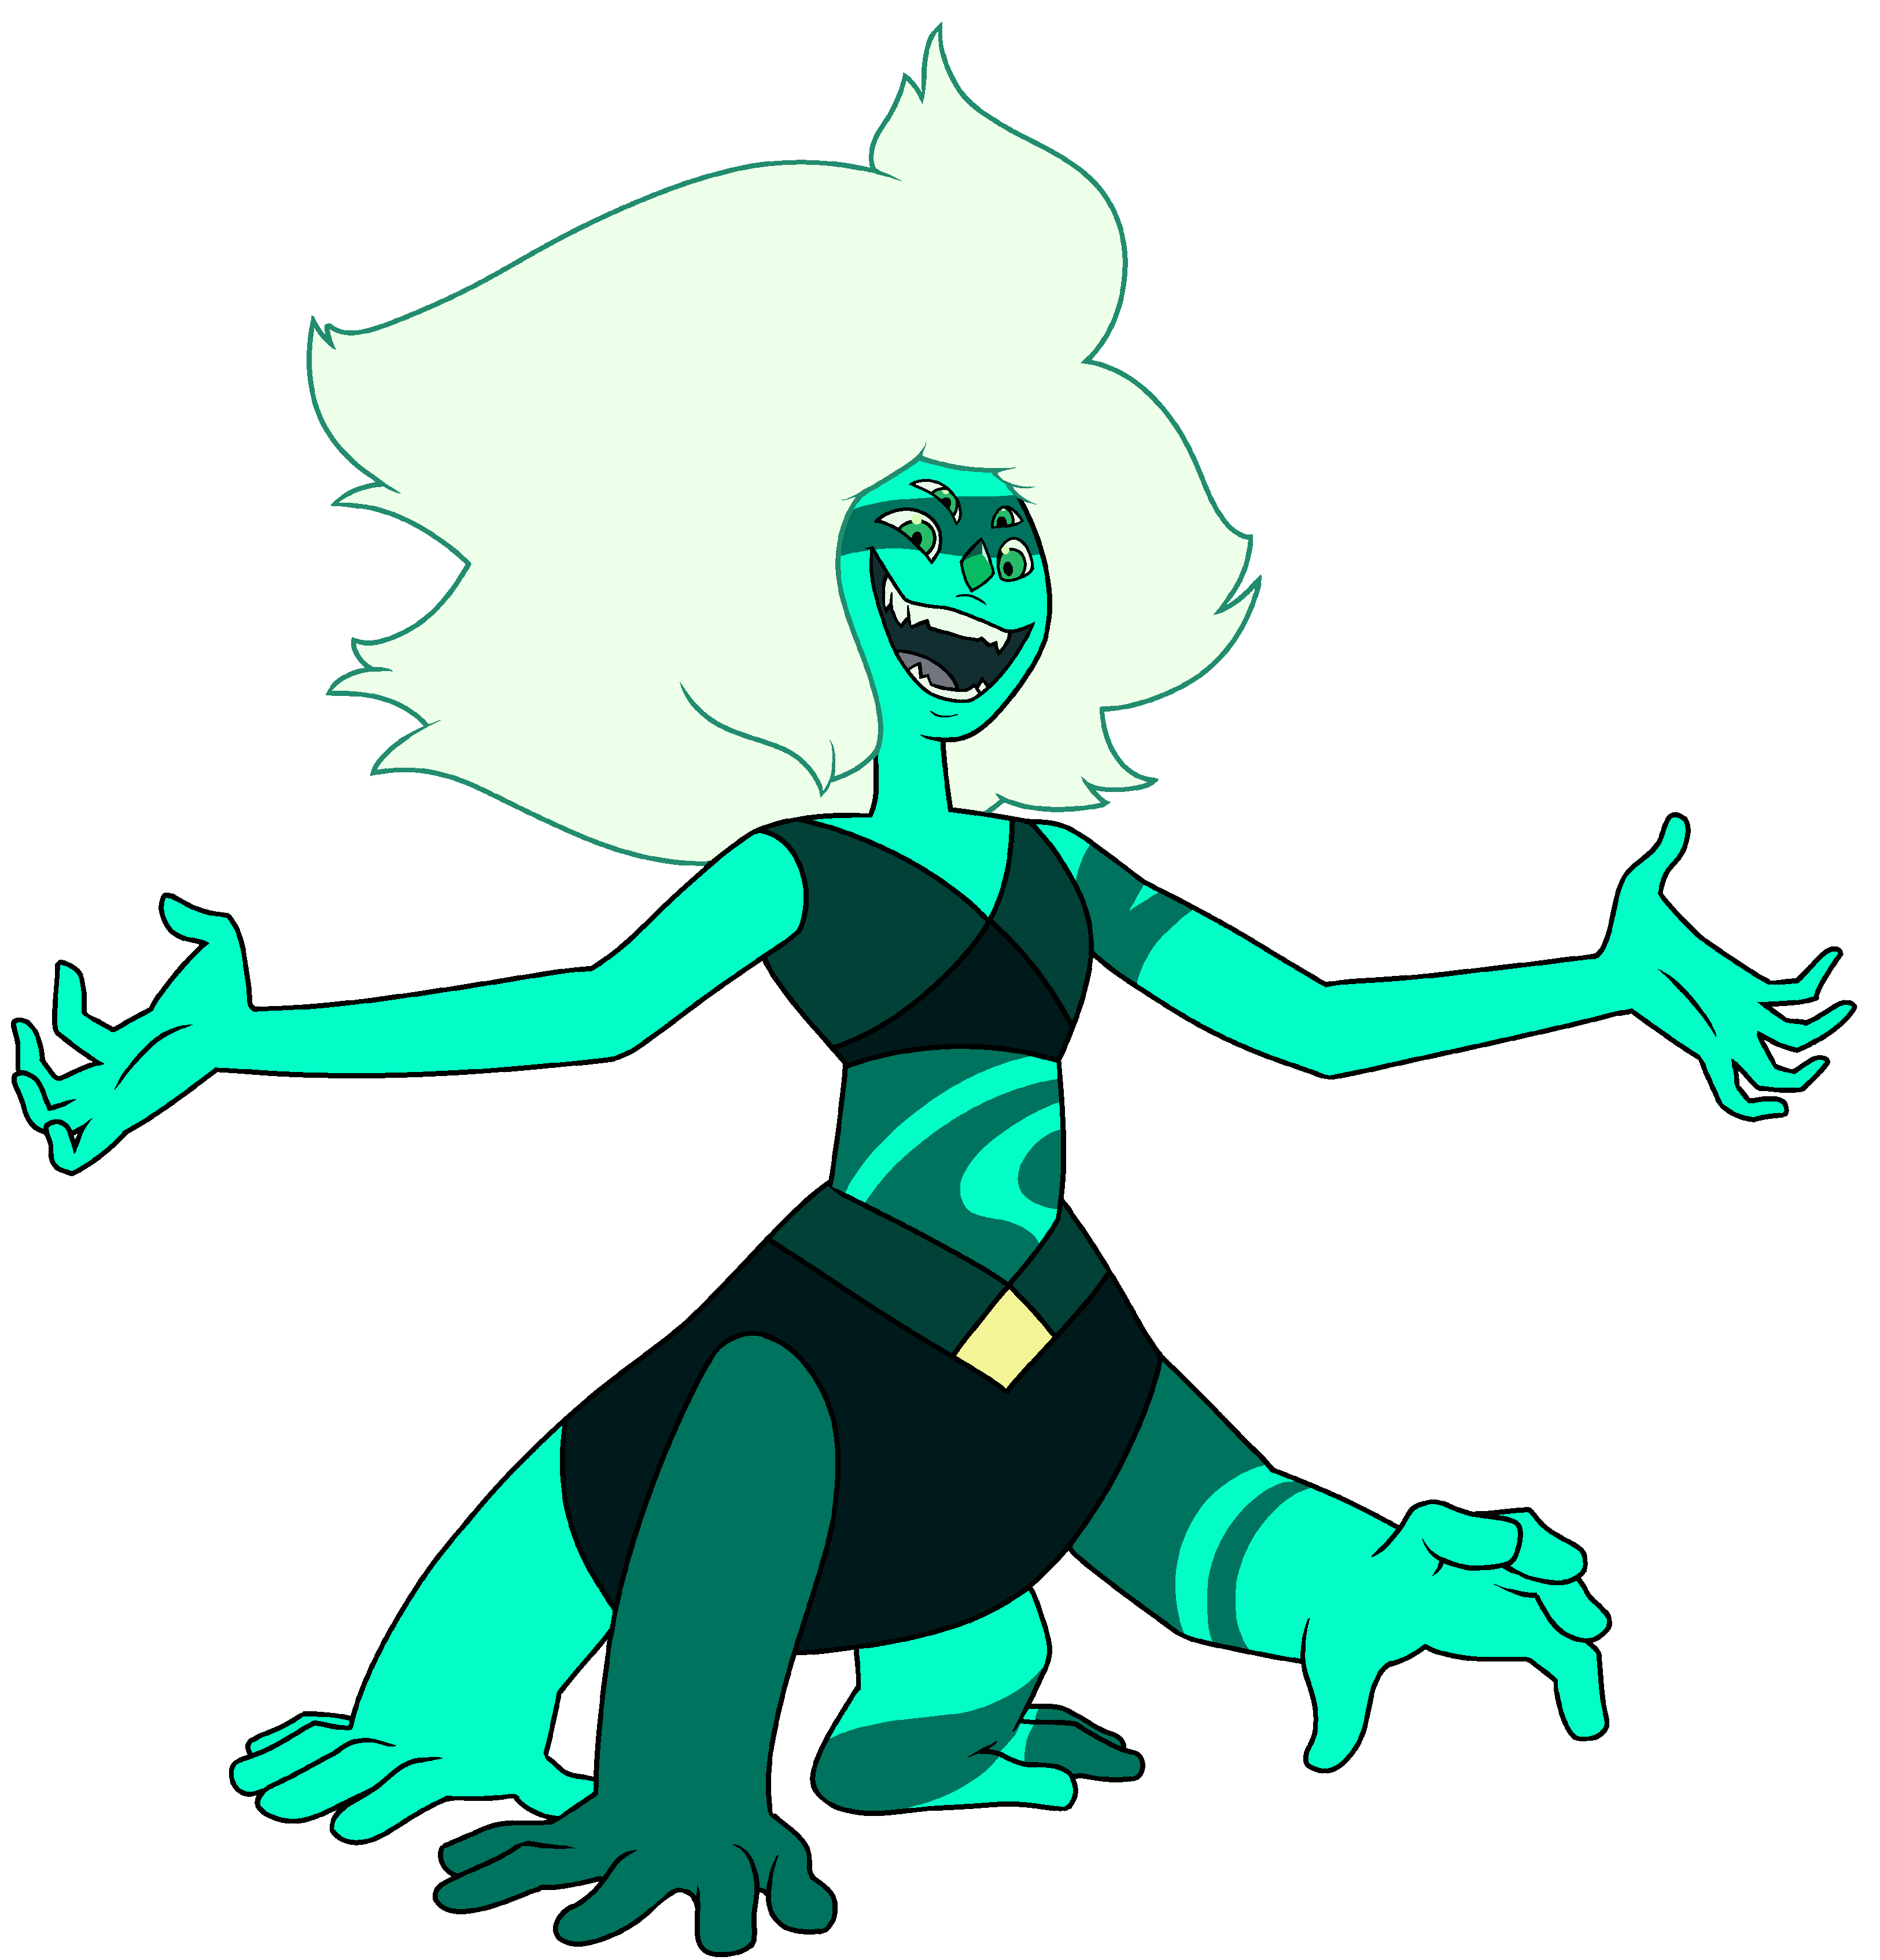 malachite was streaming in the bg 🌚